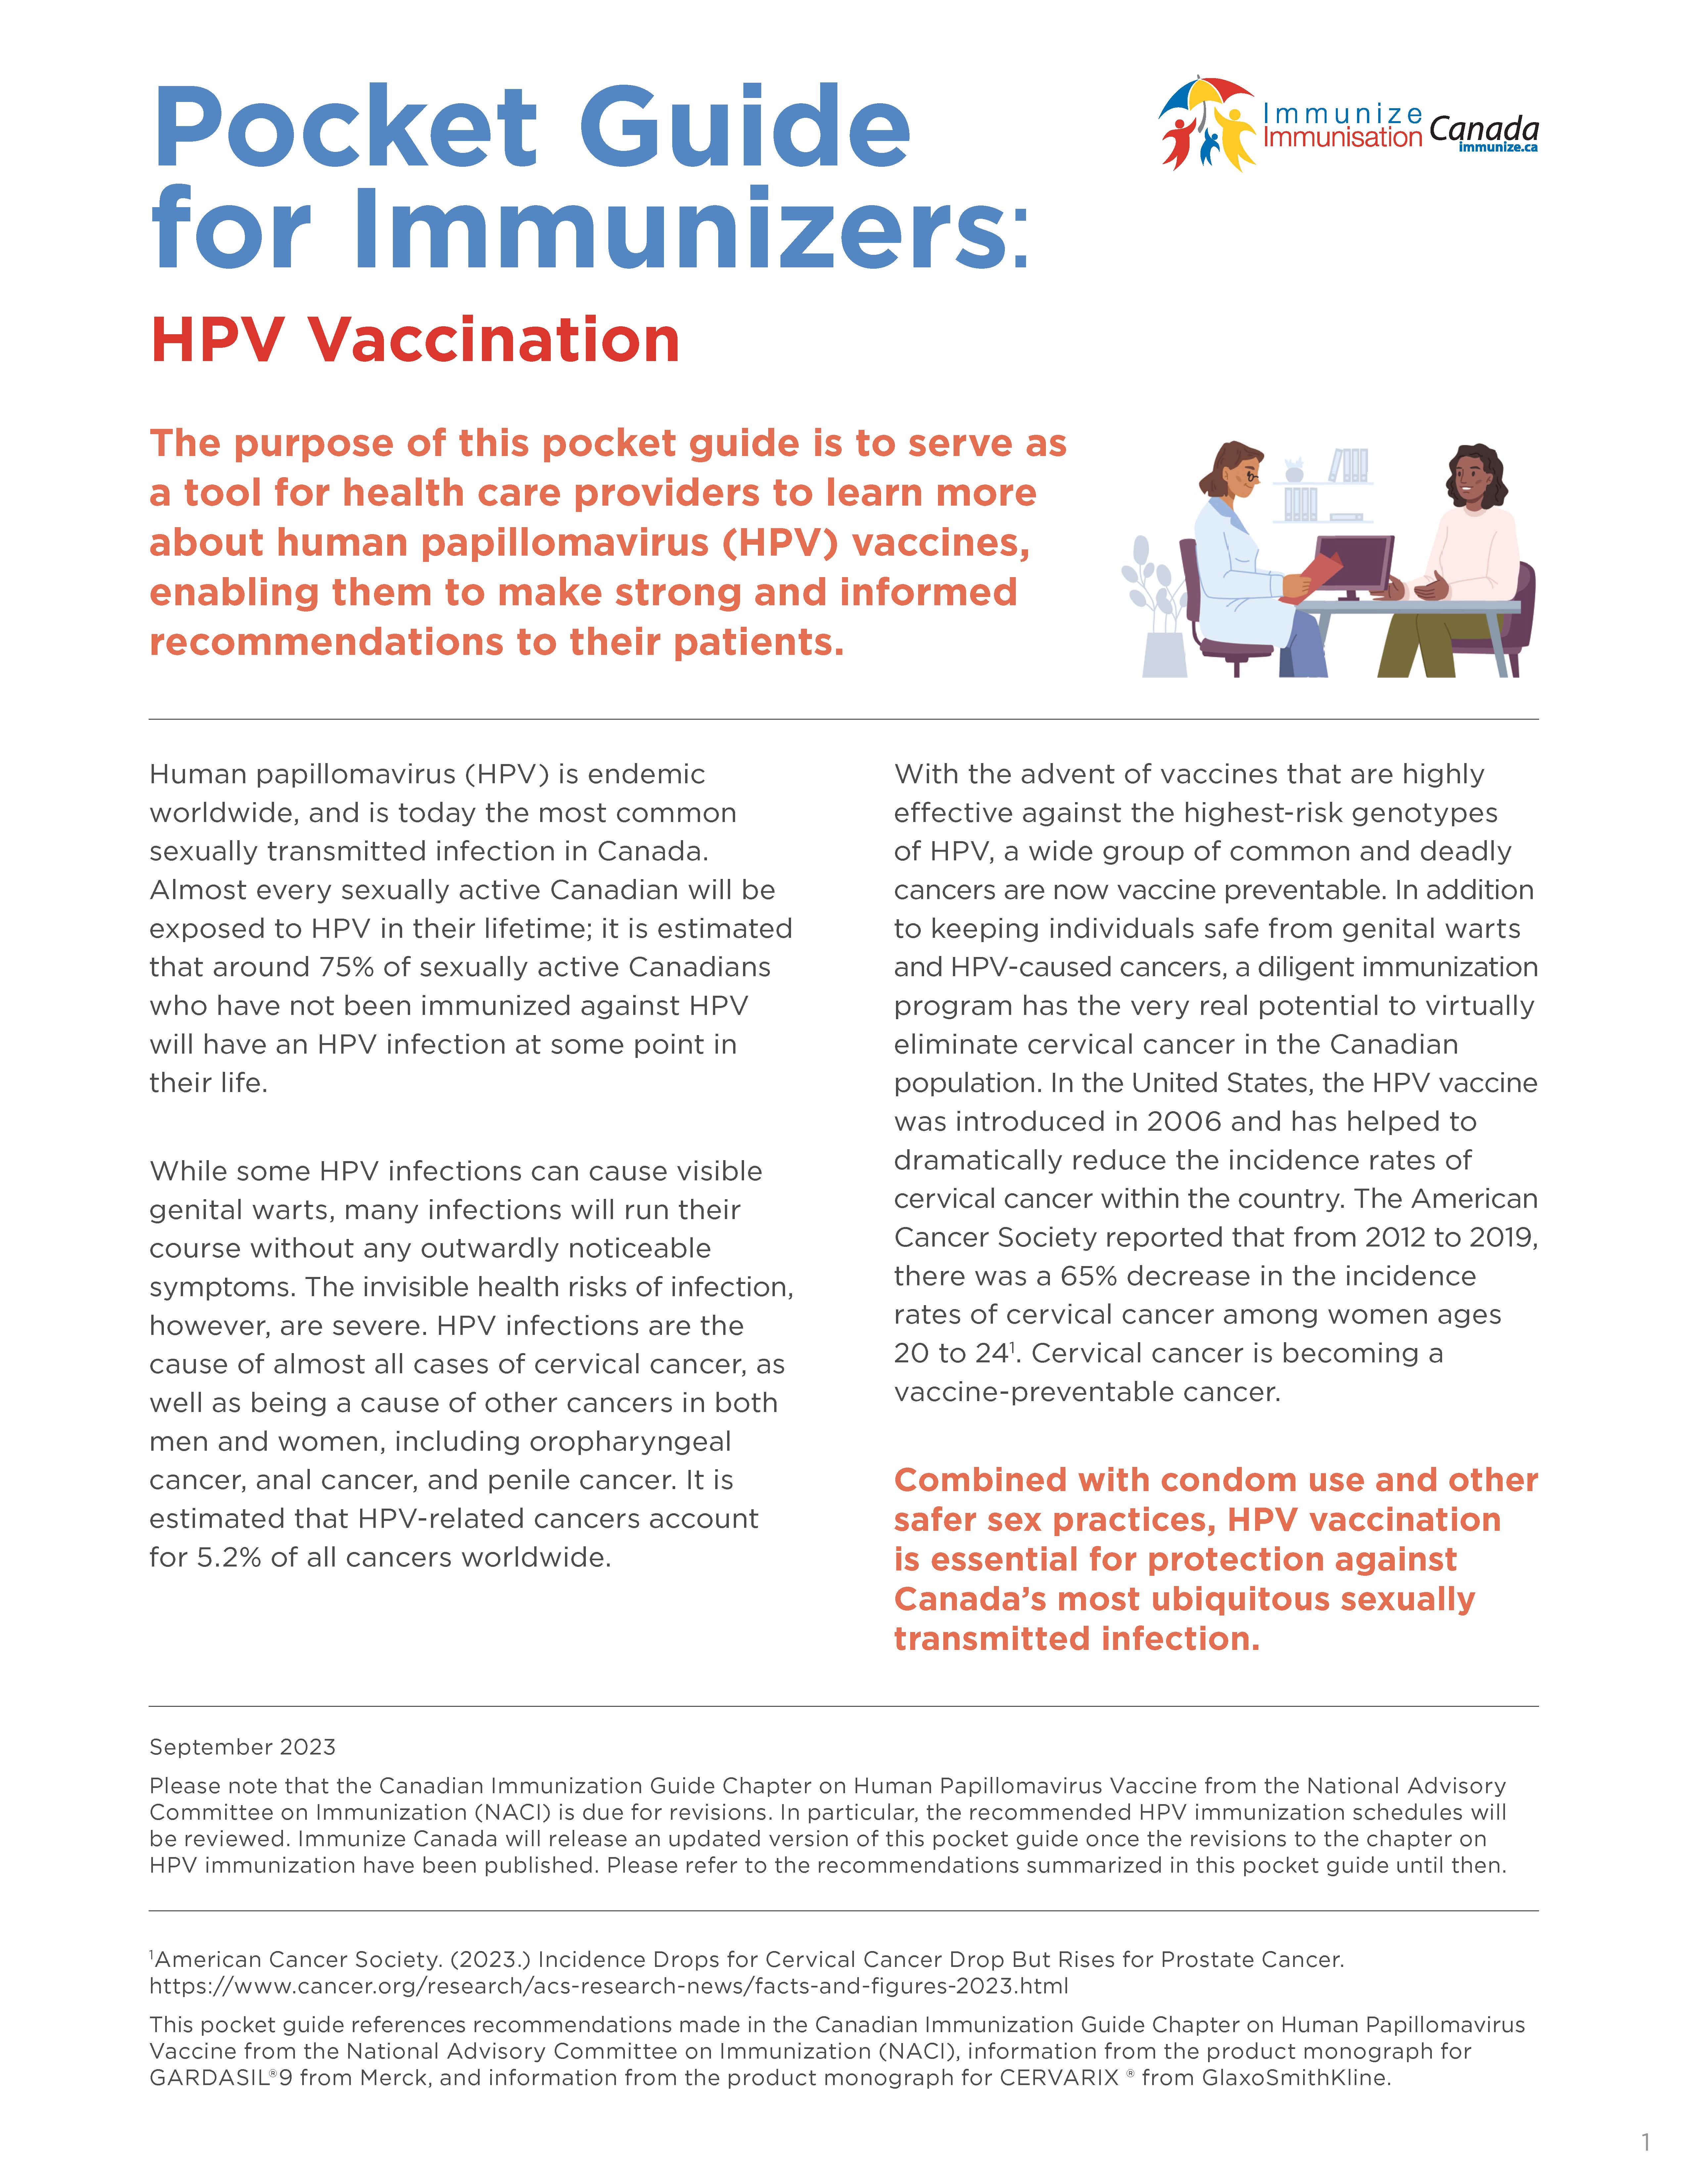 Pocket Guide for Immunizers: HPV Vaccination